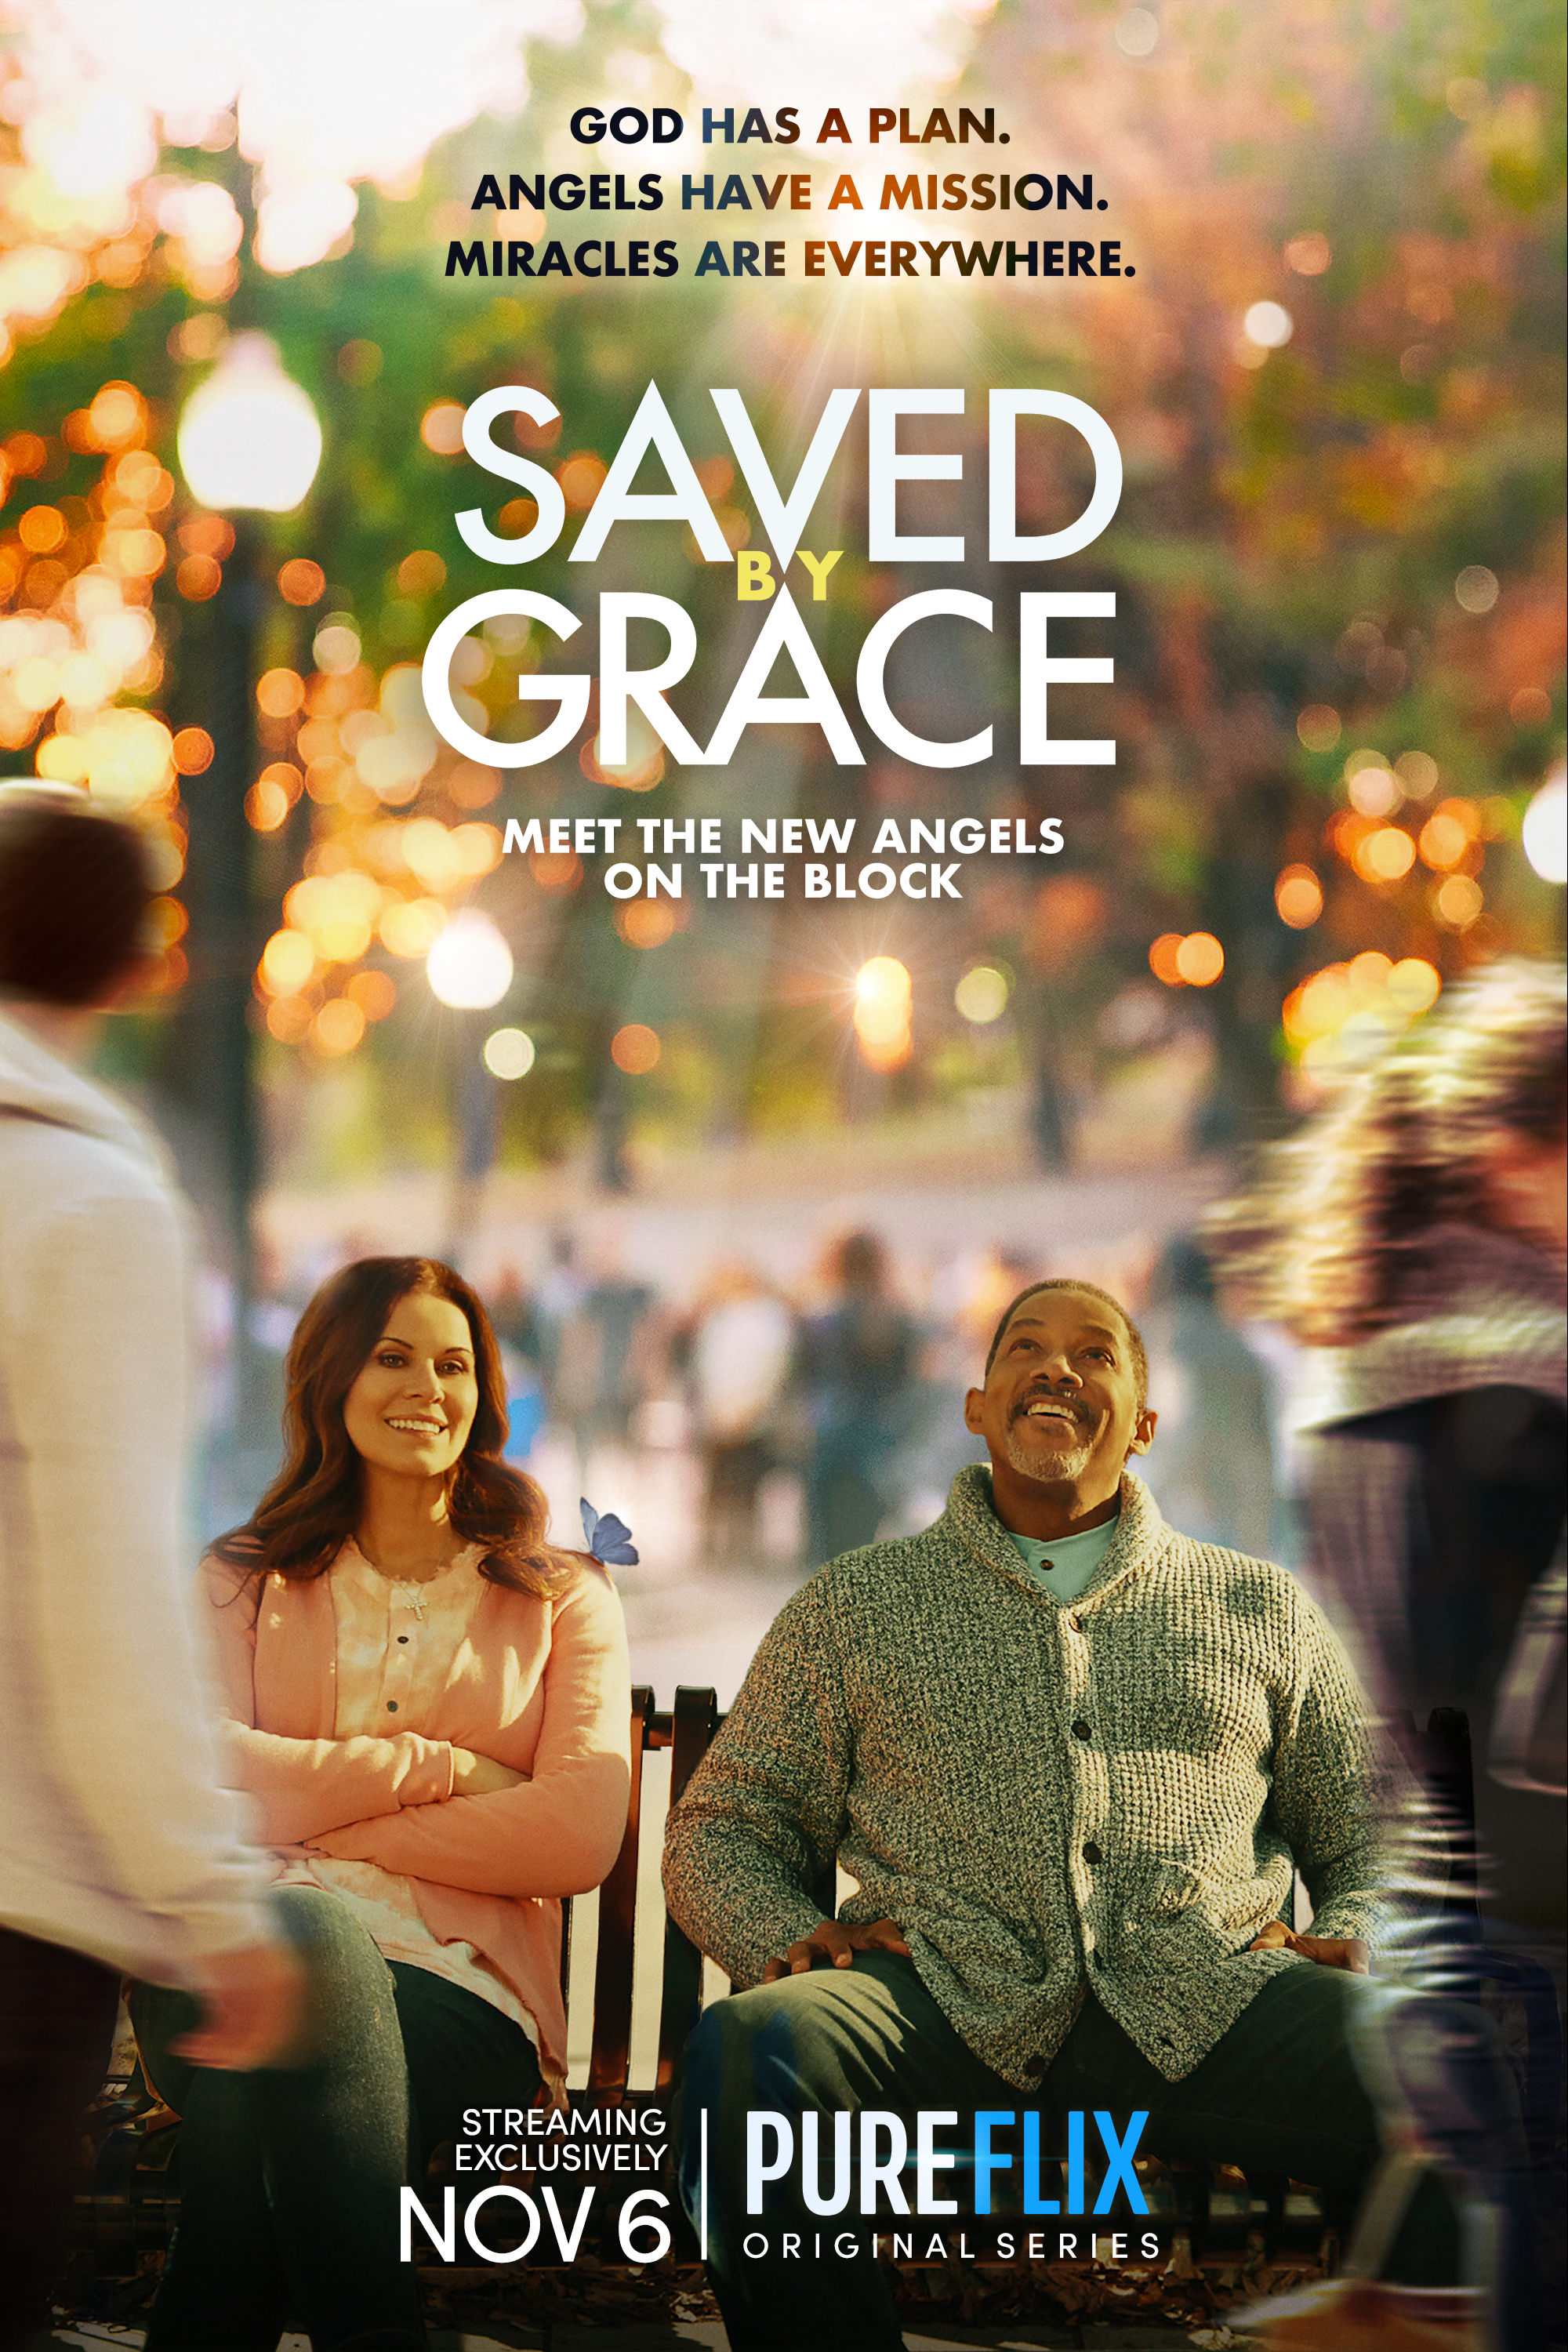 Saved By Grace will be exclusively on Pure Flix starting November 6th!